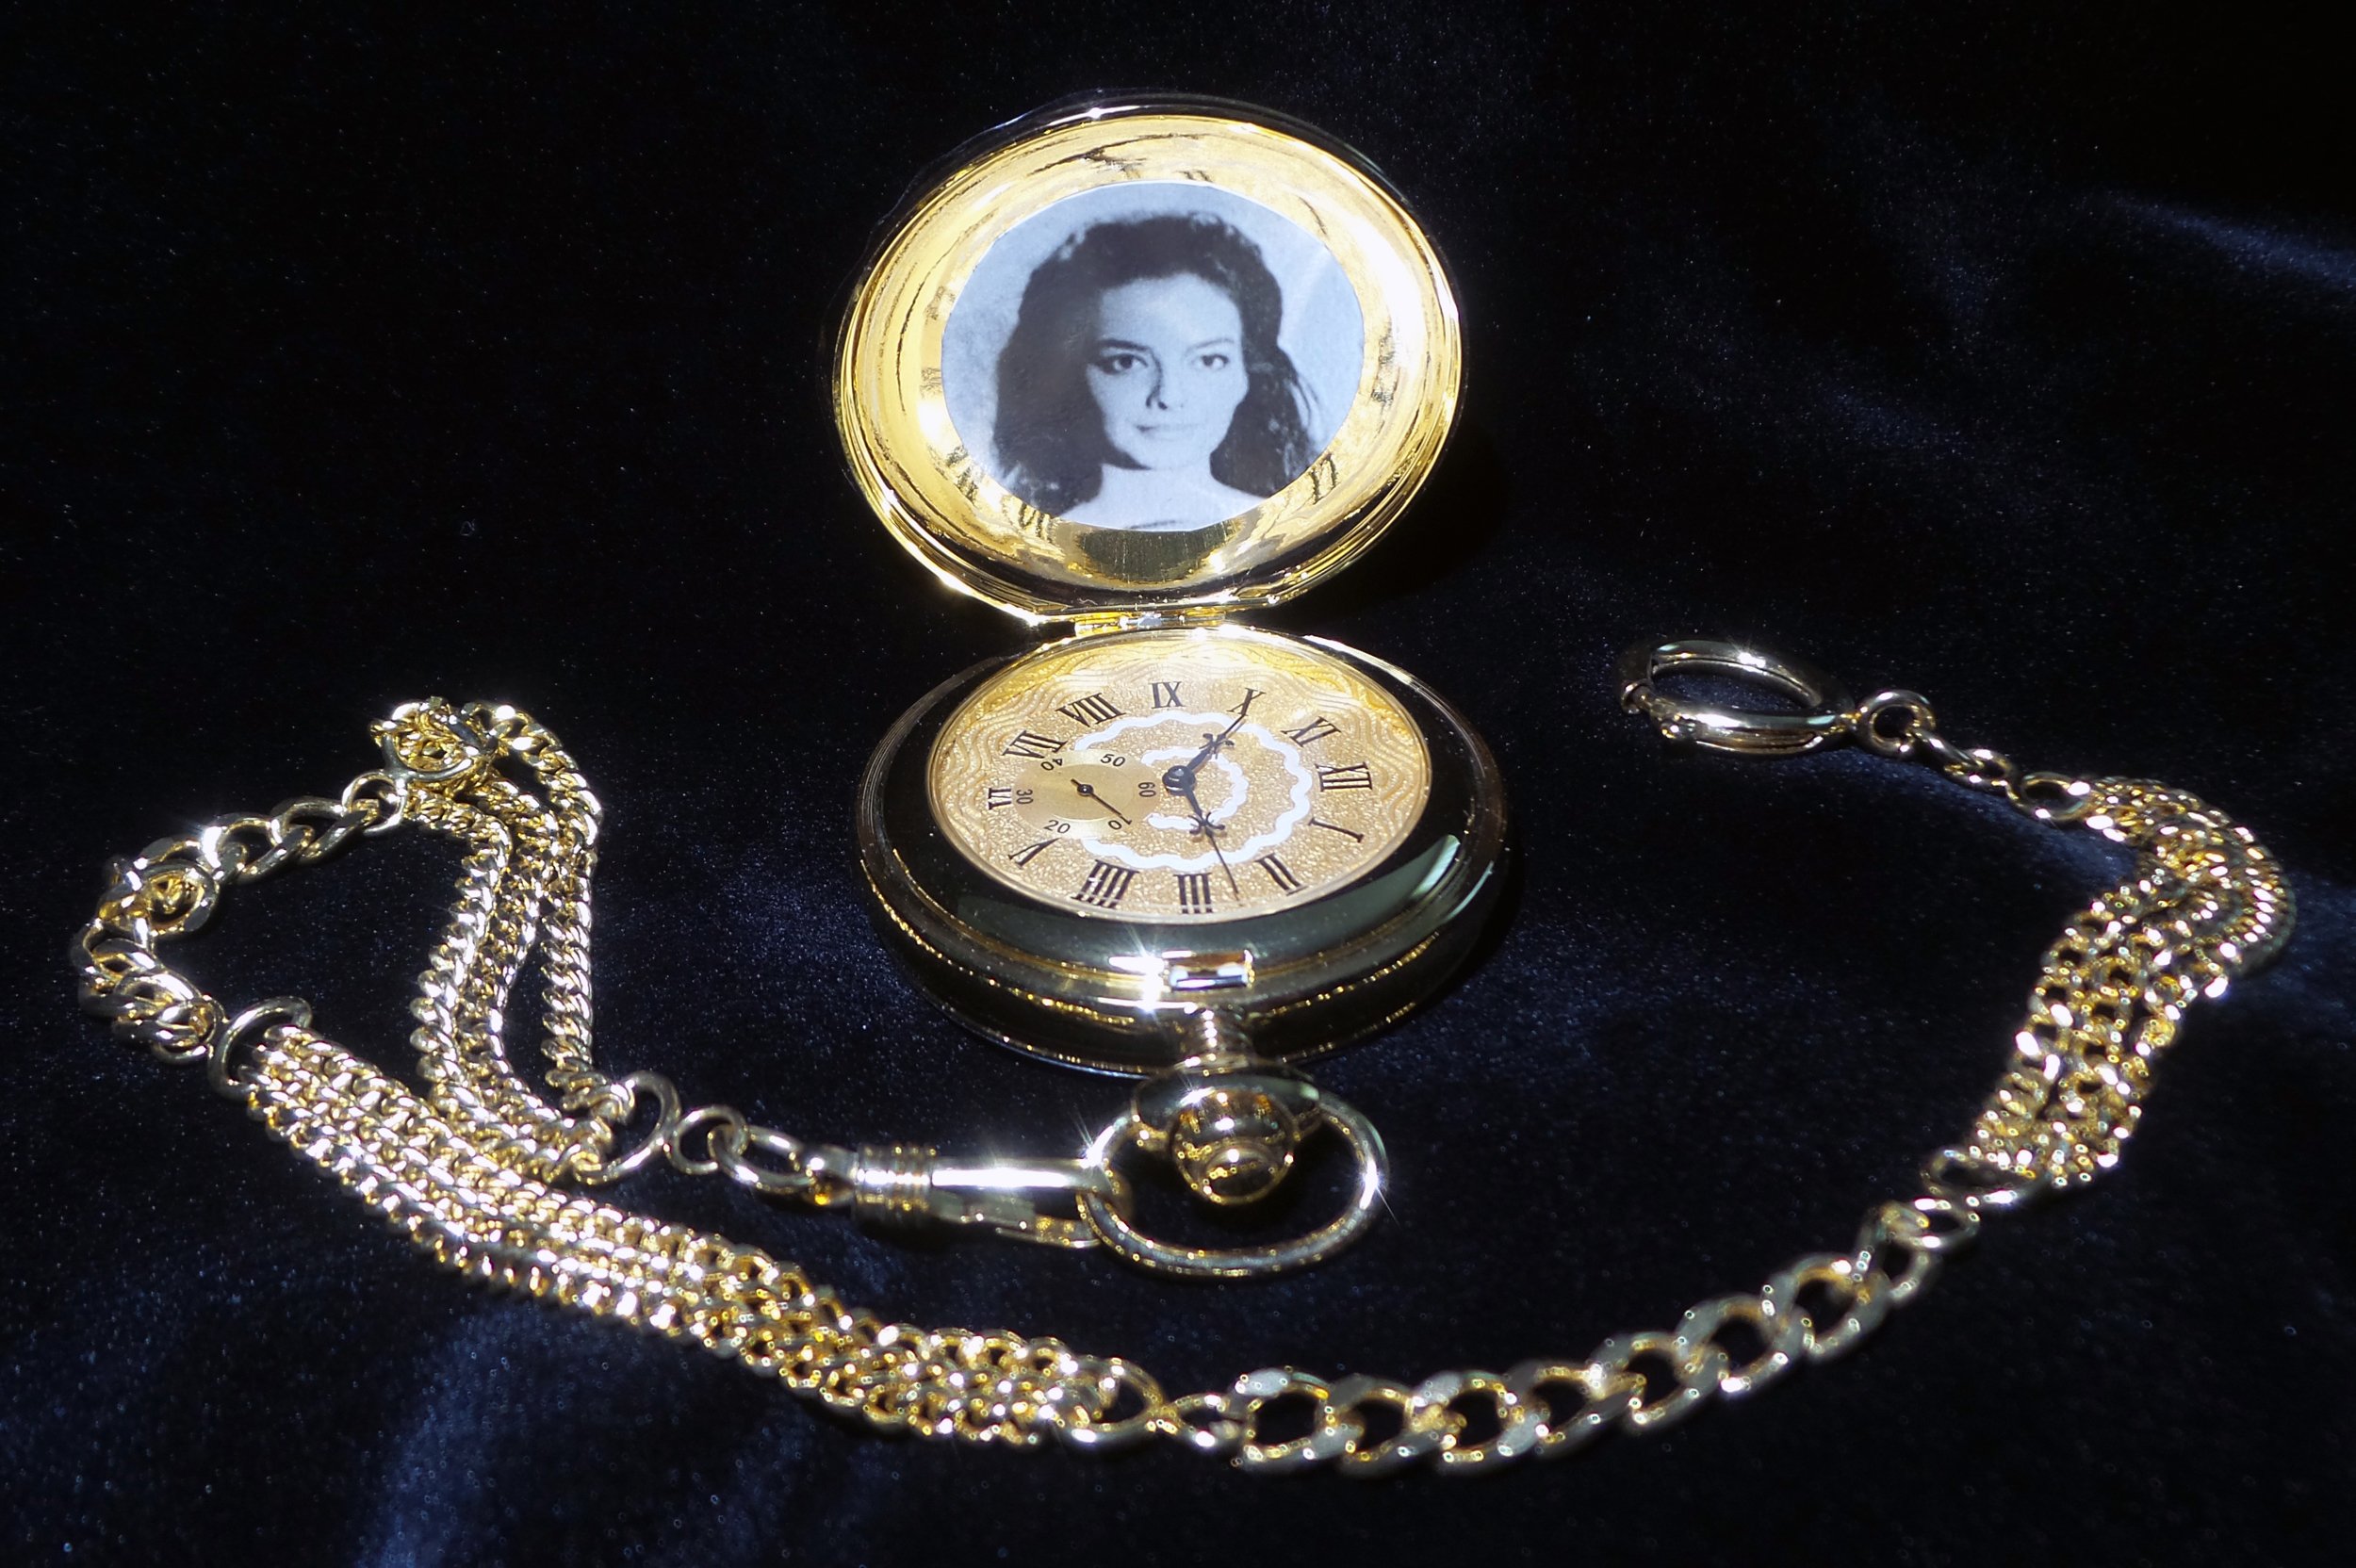 Music Pocket Watch from for A Few Dollars More - Chimes Only Version - Clint Eastwood - Great Gift